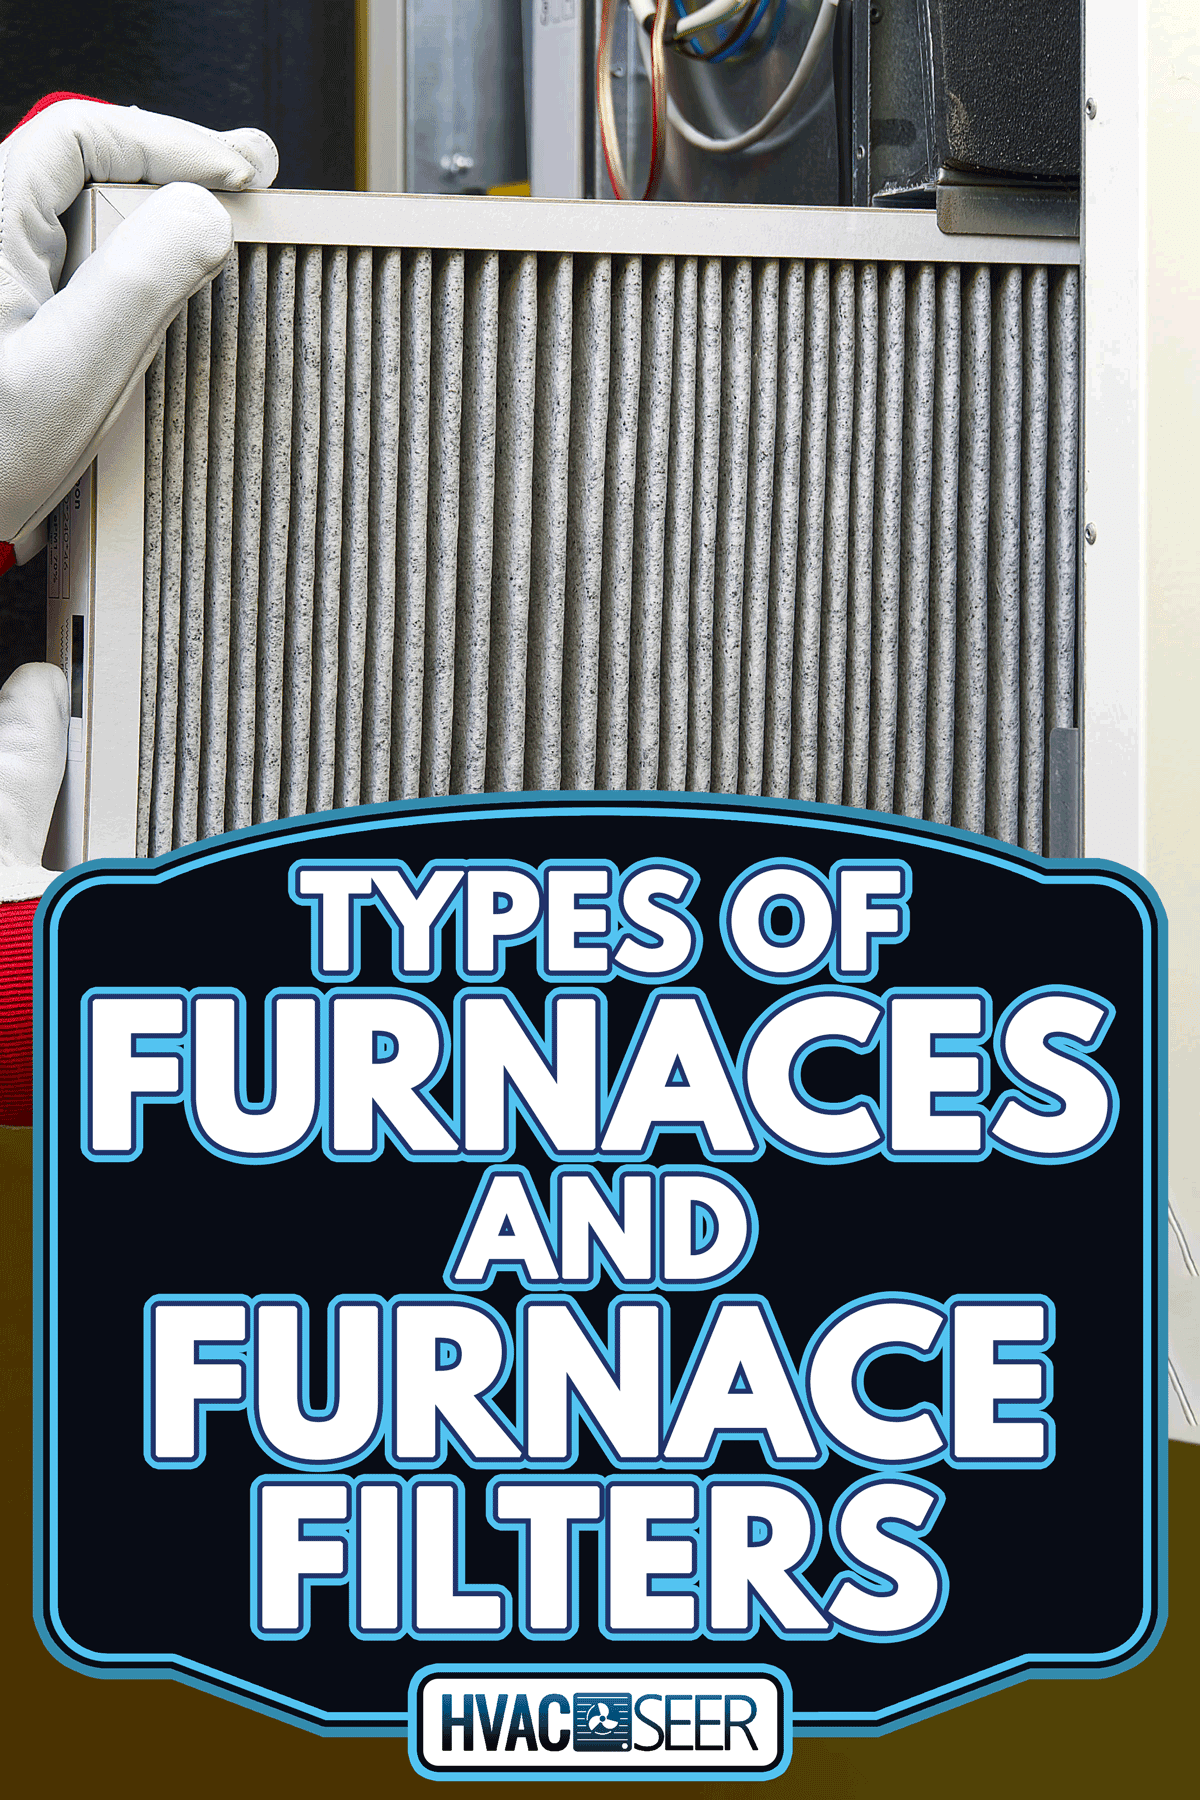 Replacing a dirty air filter, Types of Furnaces and Furnace Filters